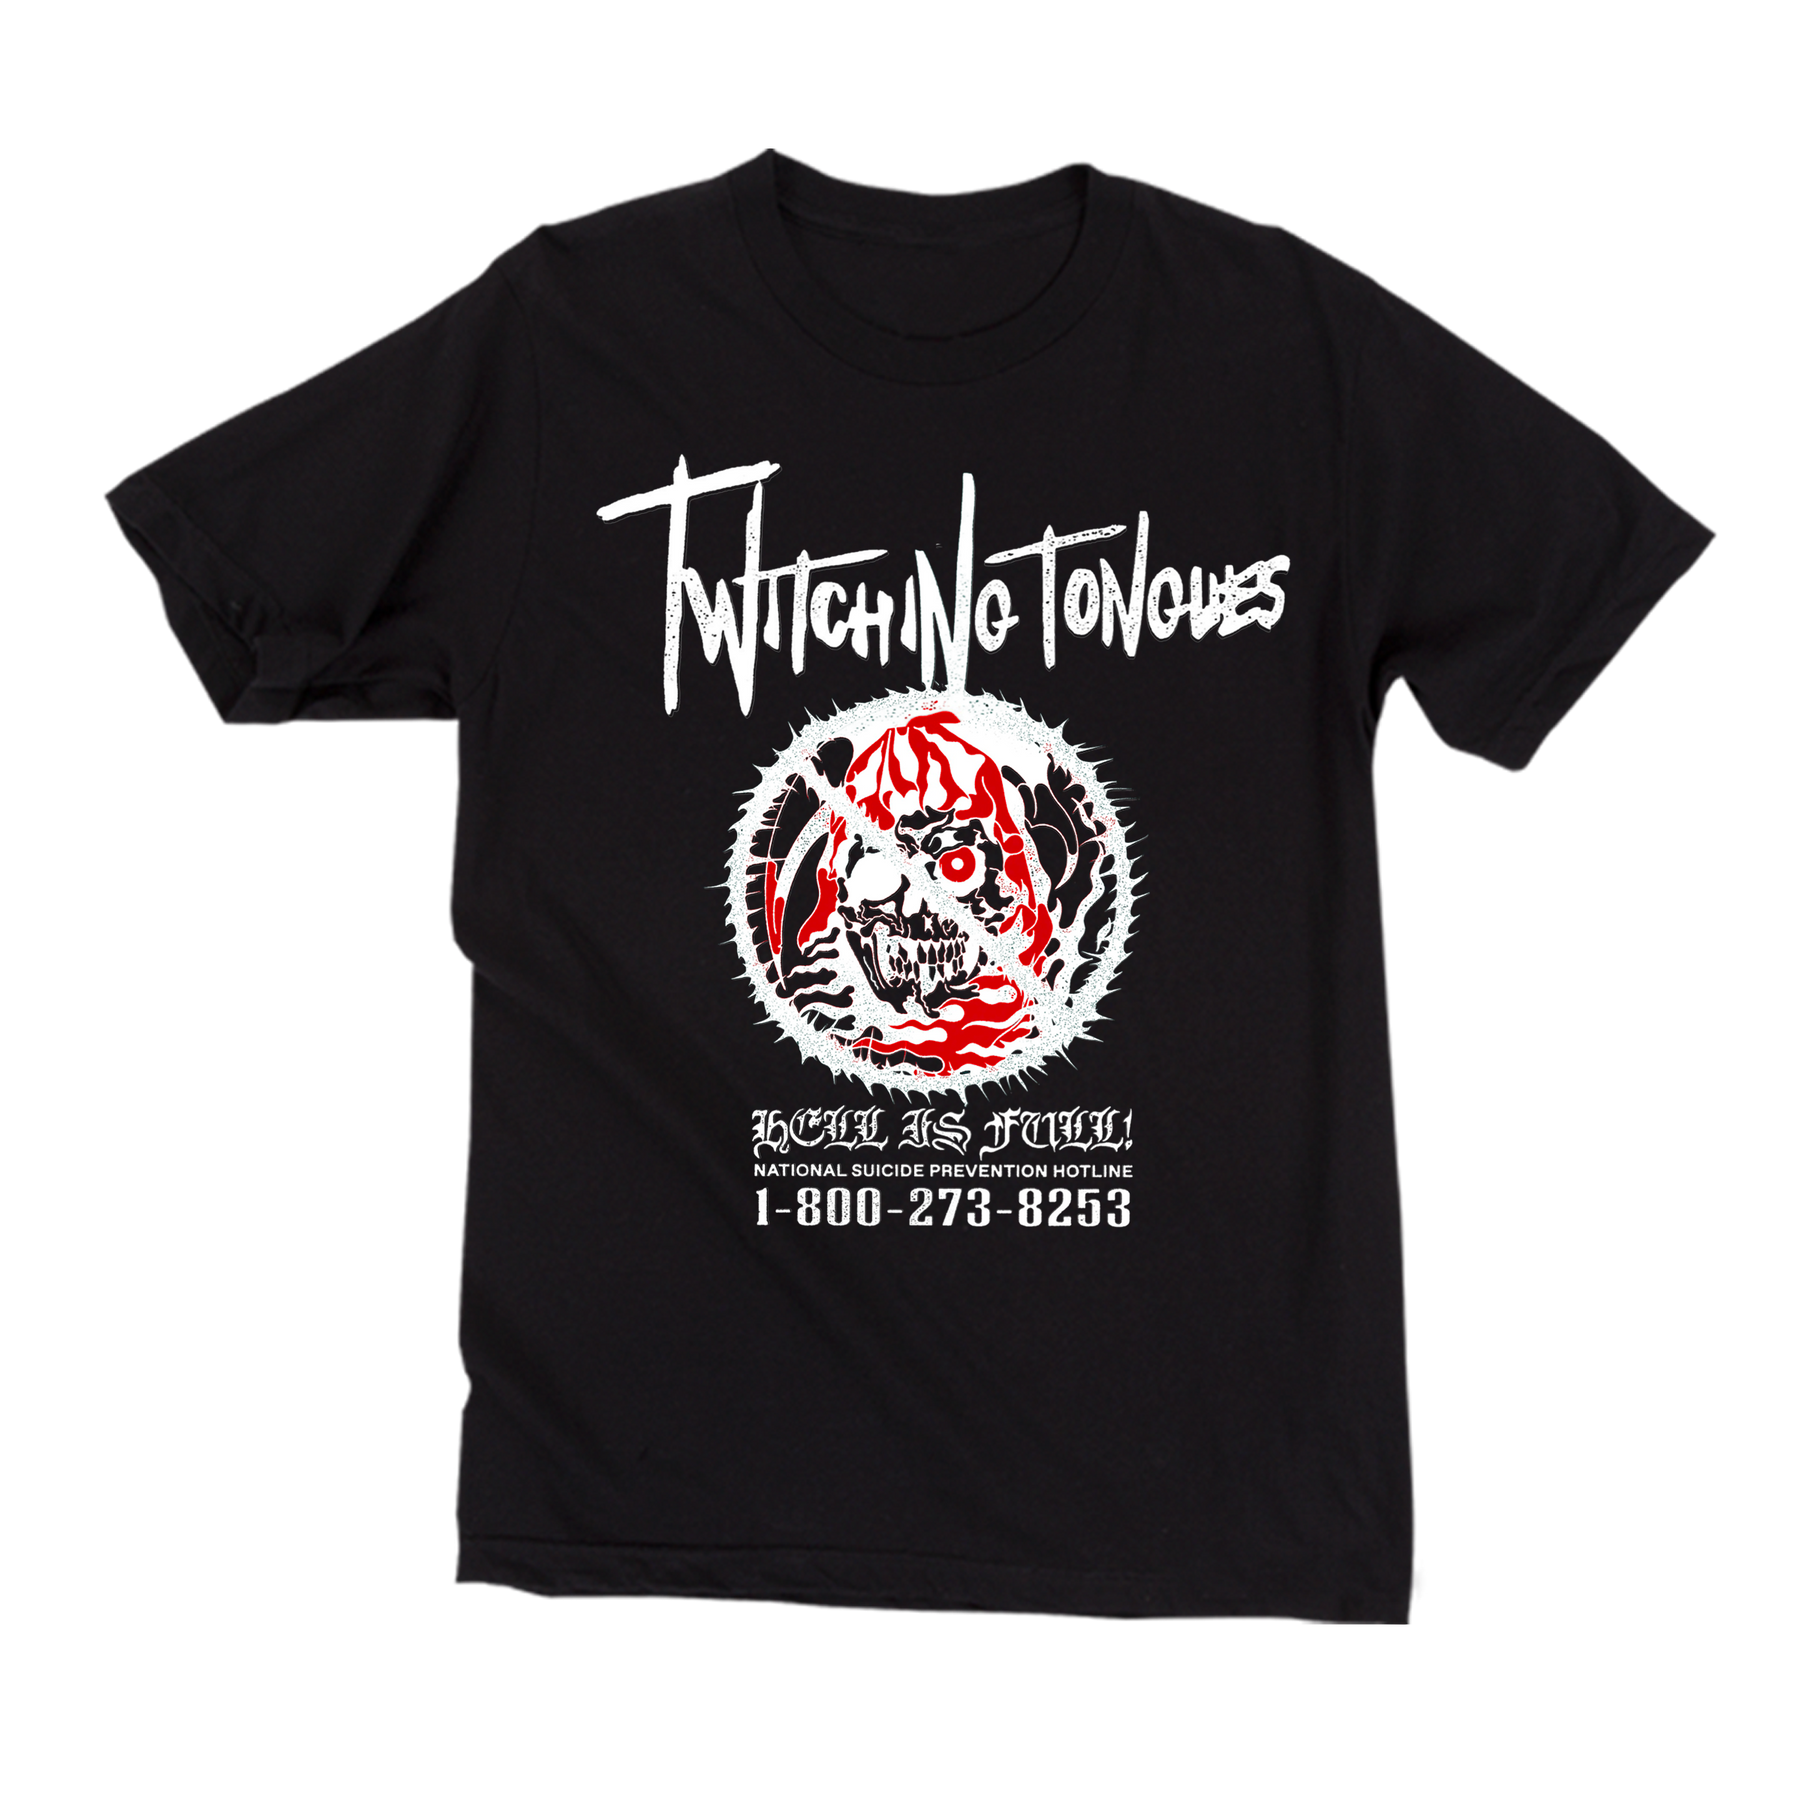 Twitching Tongues - Hell Is Full T-Shirt